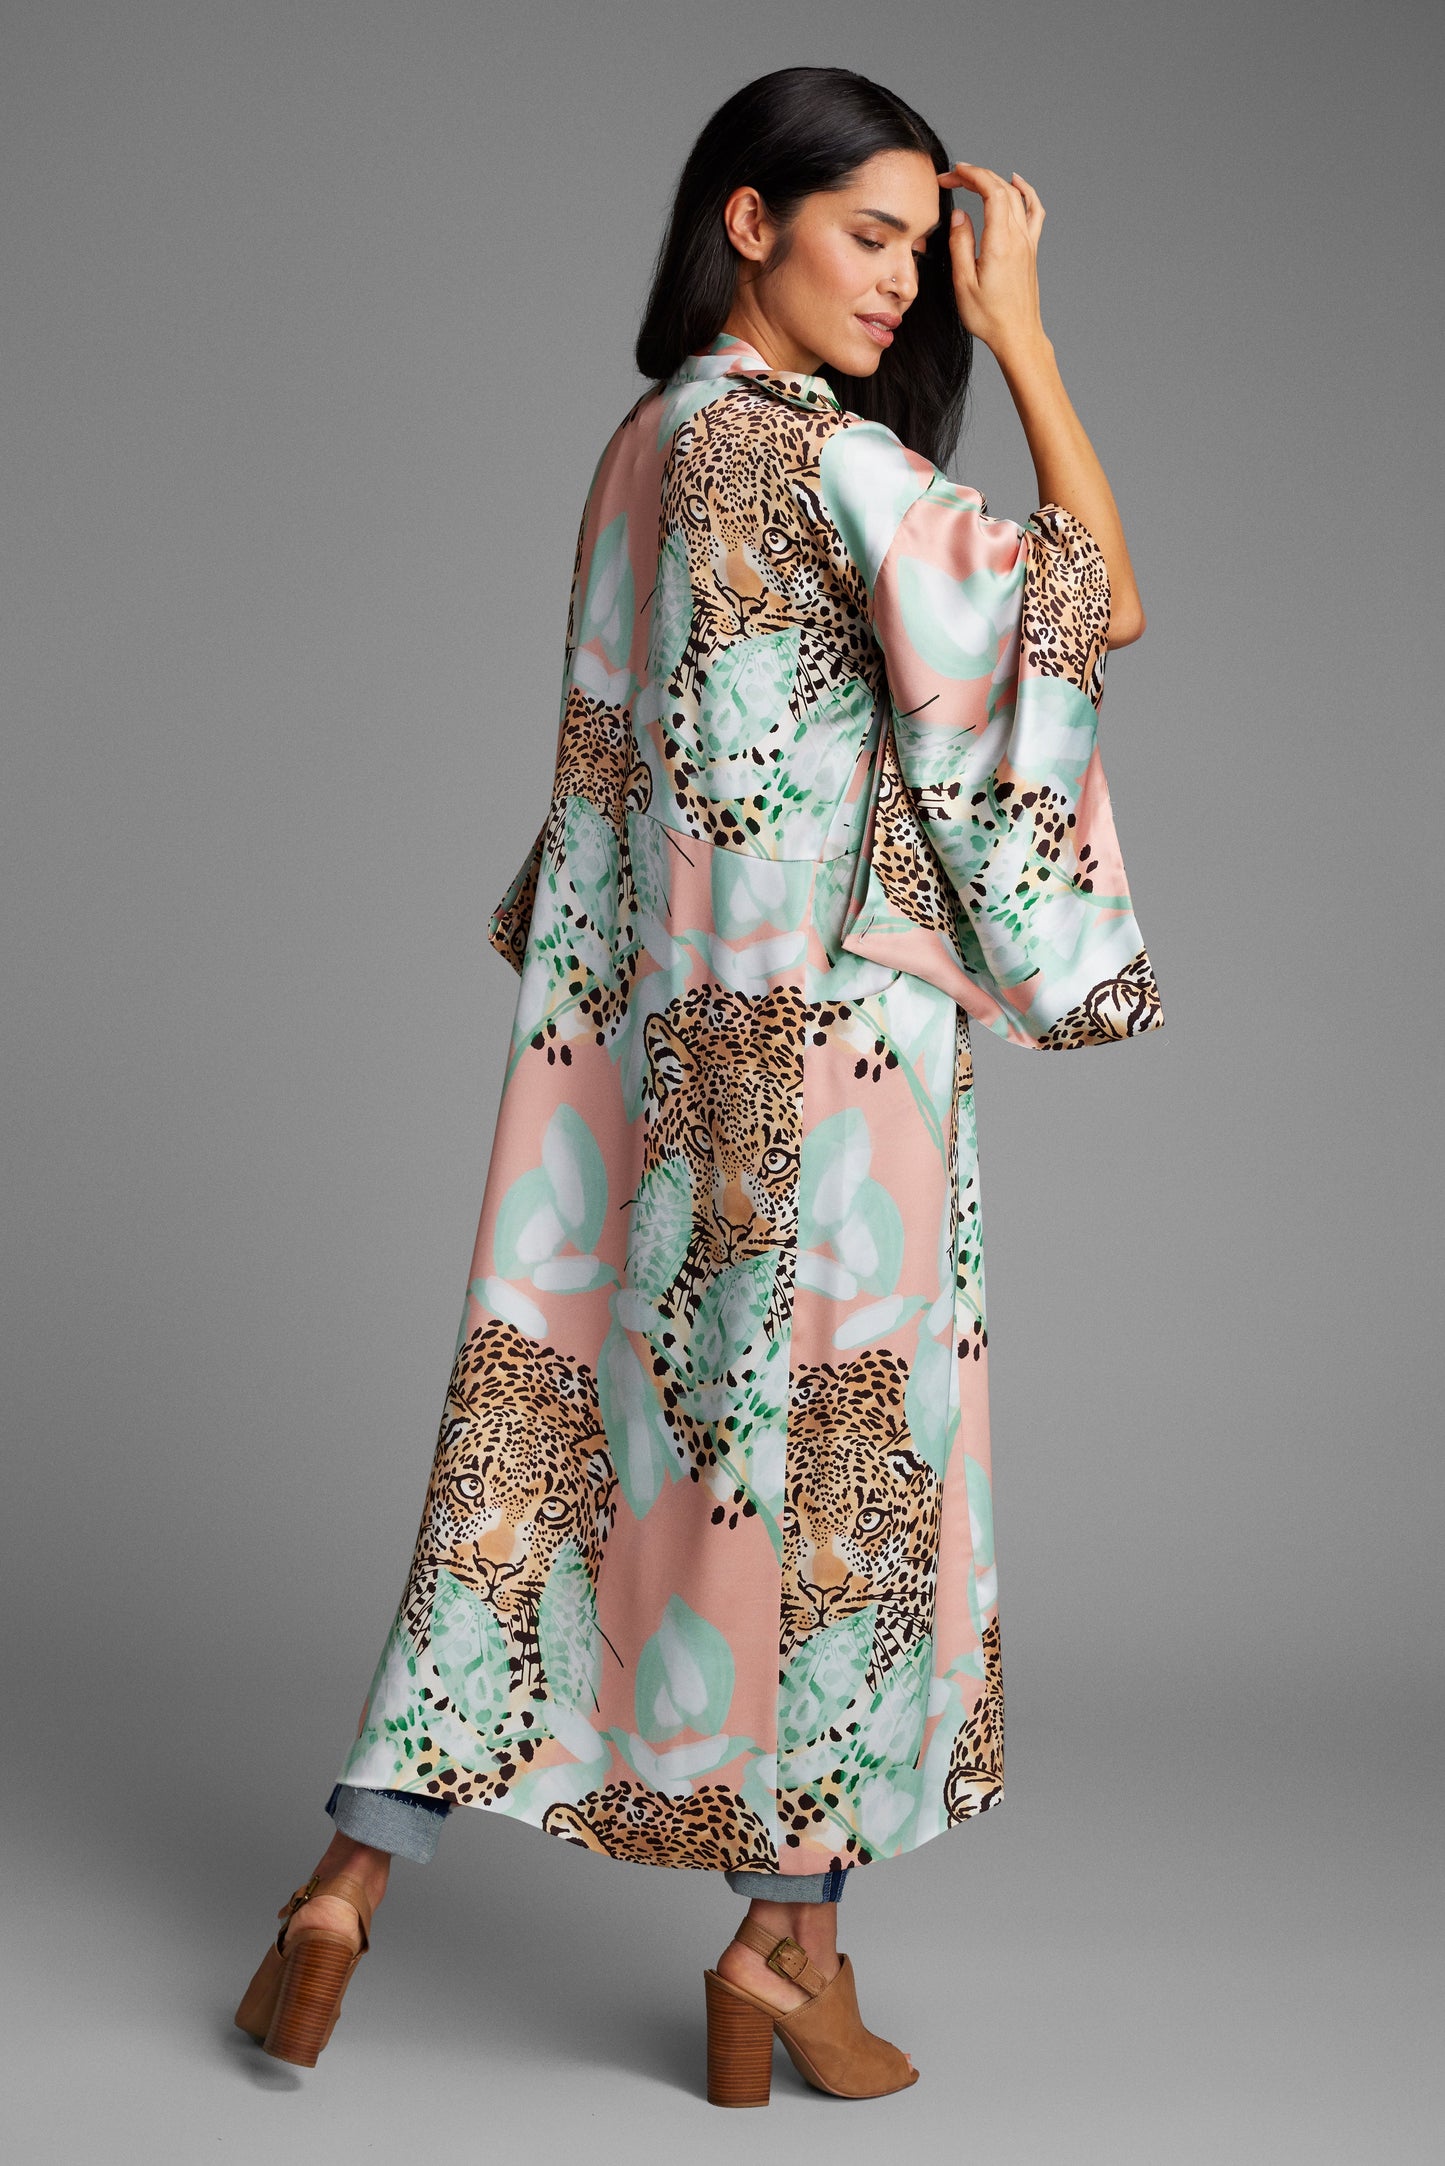 Woman showing her back wearing an all over tropical animal print kimono duster made from recycled materials